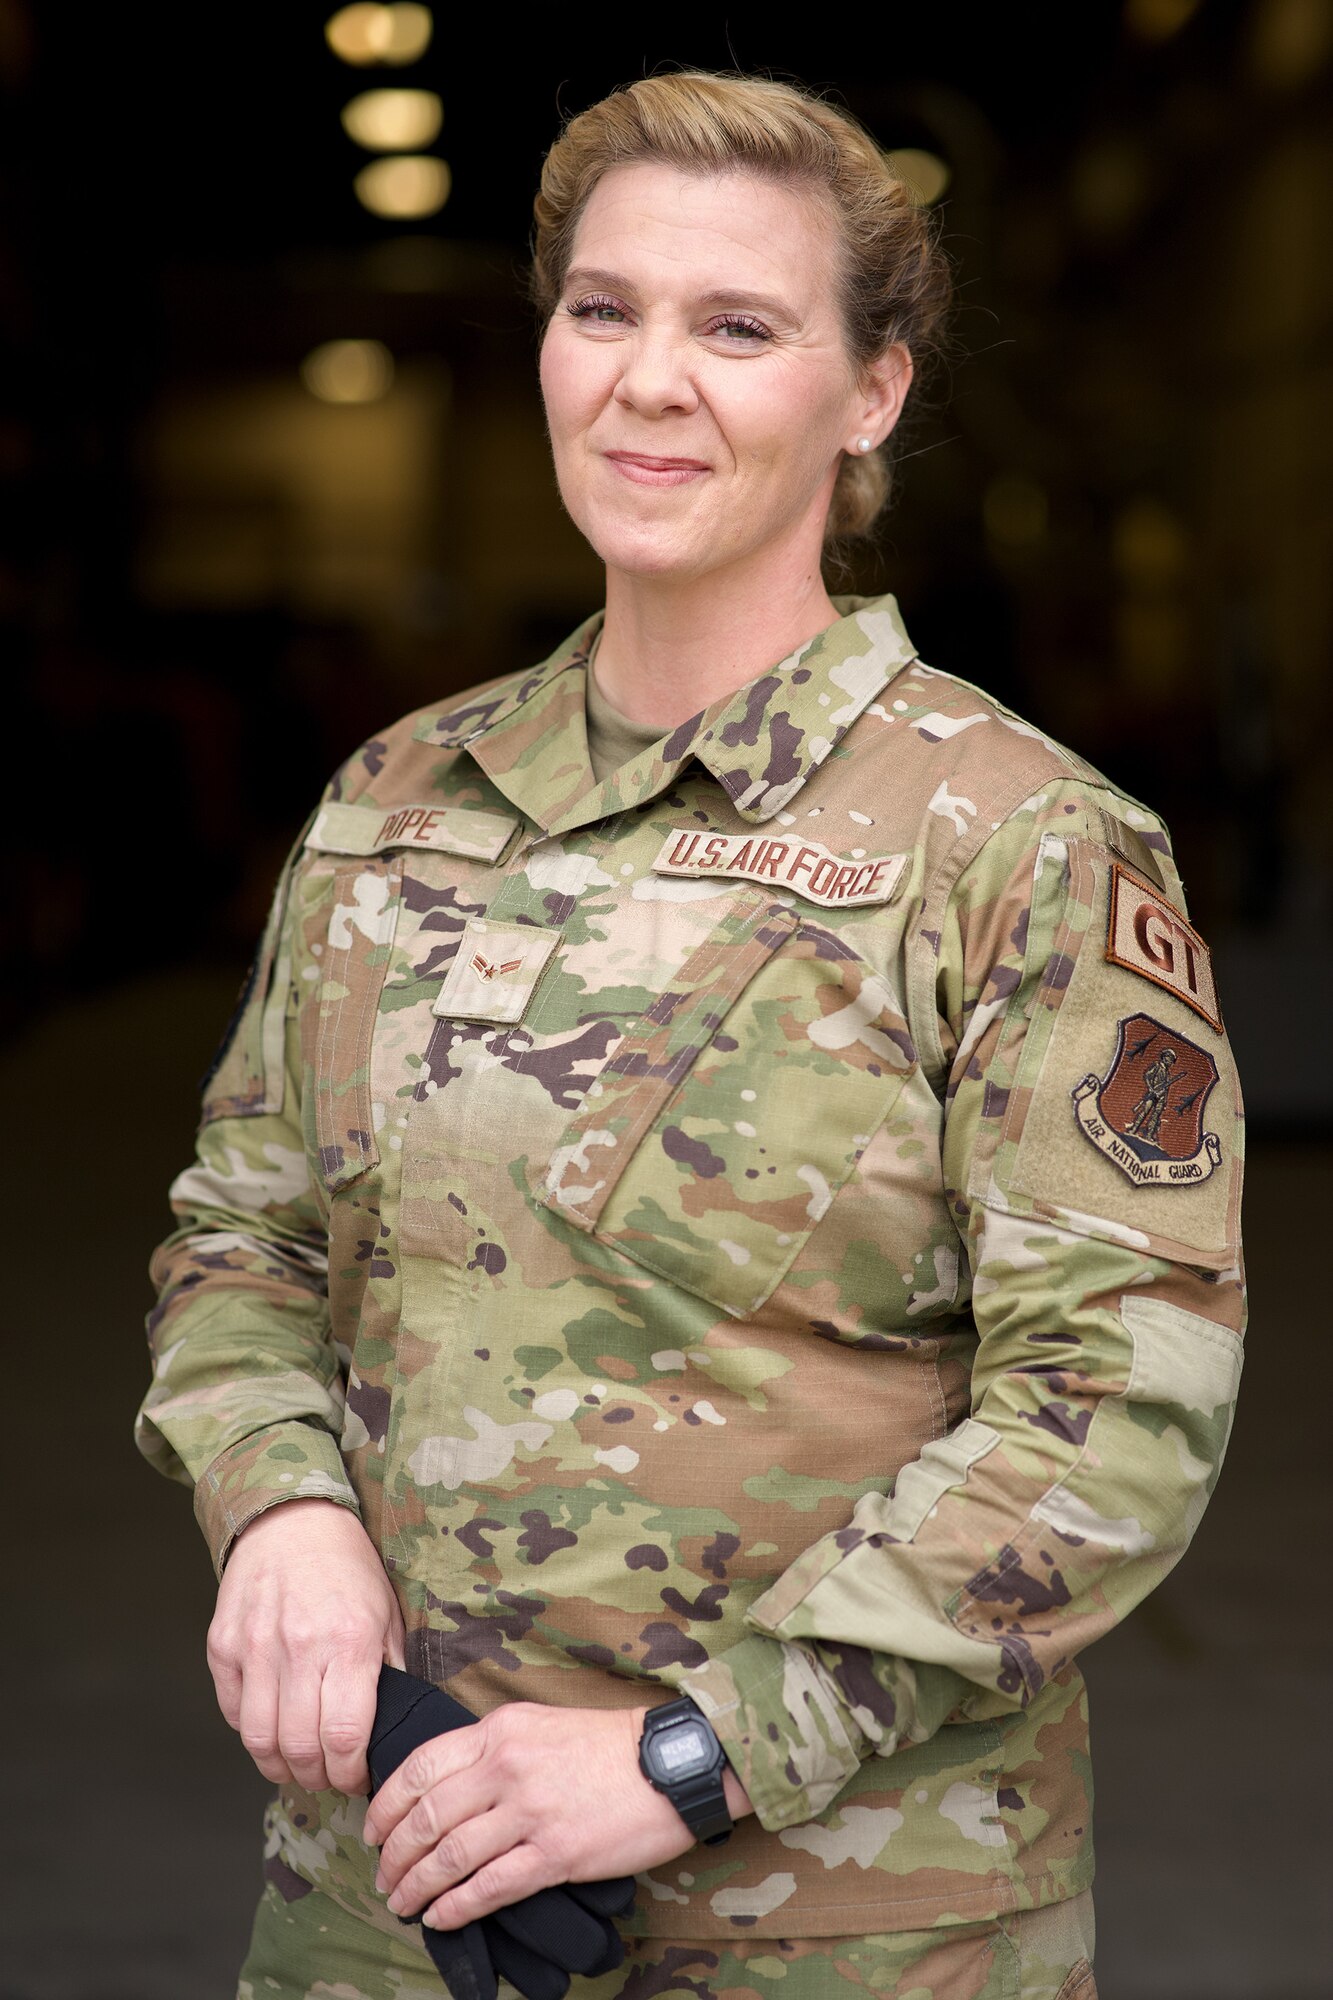 Alaska Air National Guard Airman 1st Class Heather Pope is a ground transportation specialist with 176th Logistics Readiness Squadron, 176th Mission Support Group, 176th Wing. Pope worked to lose 133 pounds to enlist a day before her 40th birthday, the cutoff age to join the military.